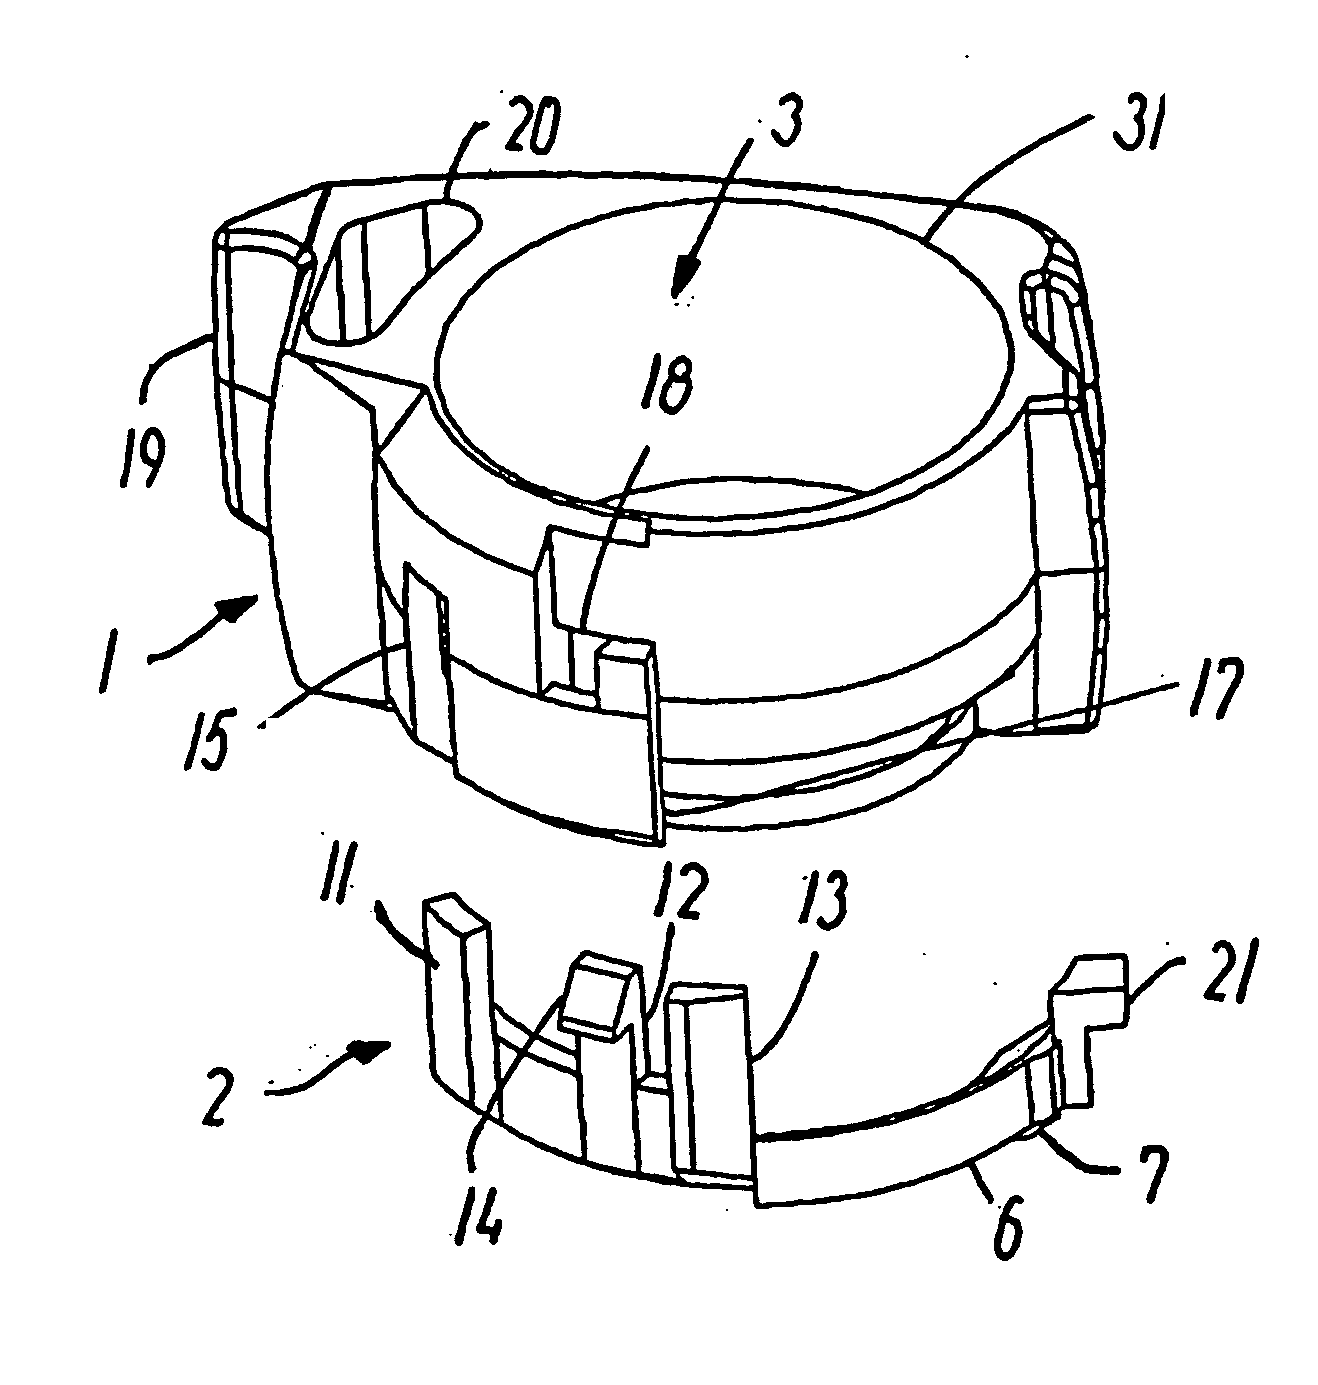 Battery compartment for a hearing aid